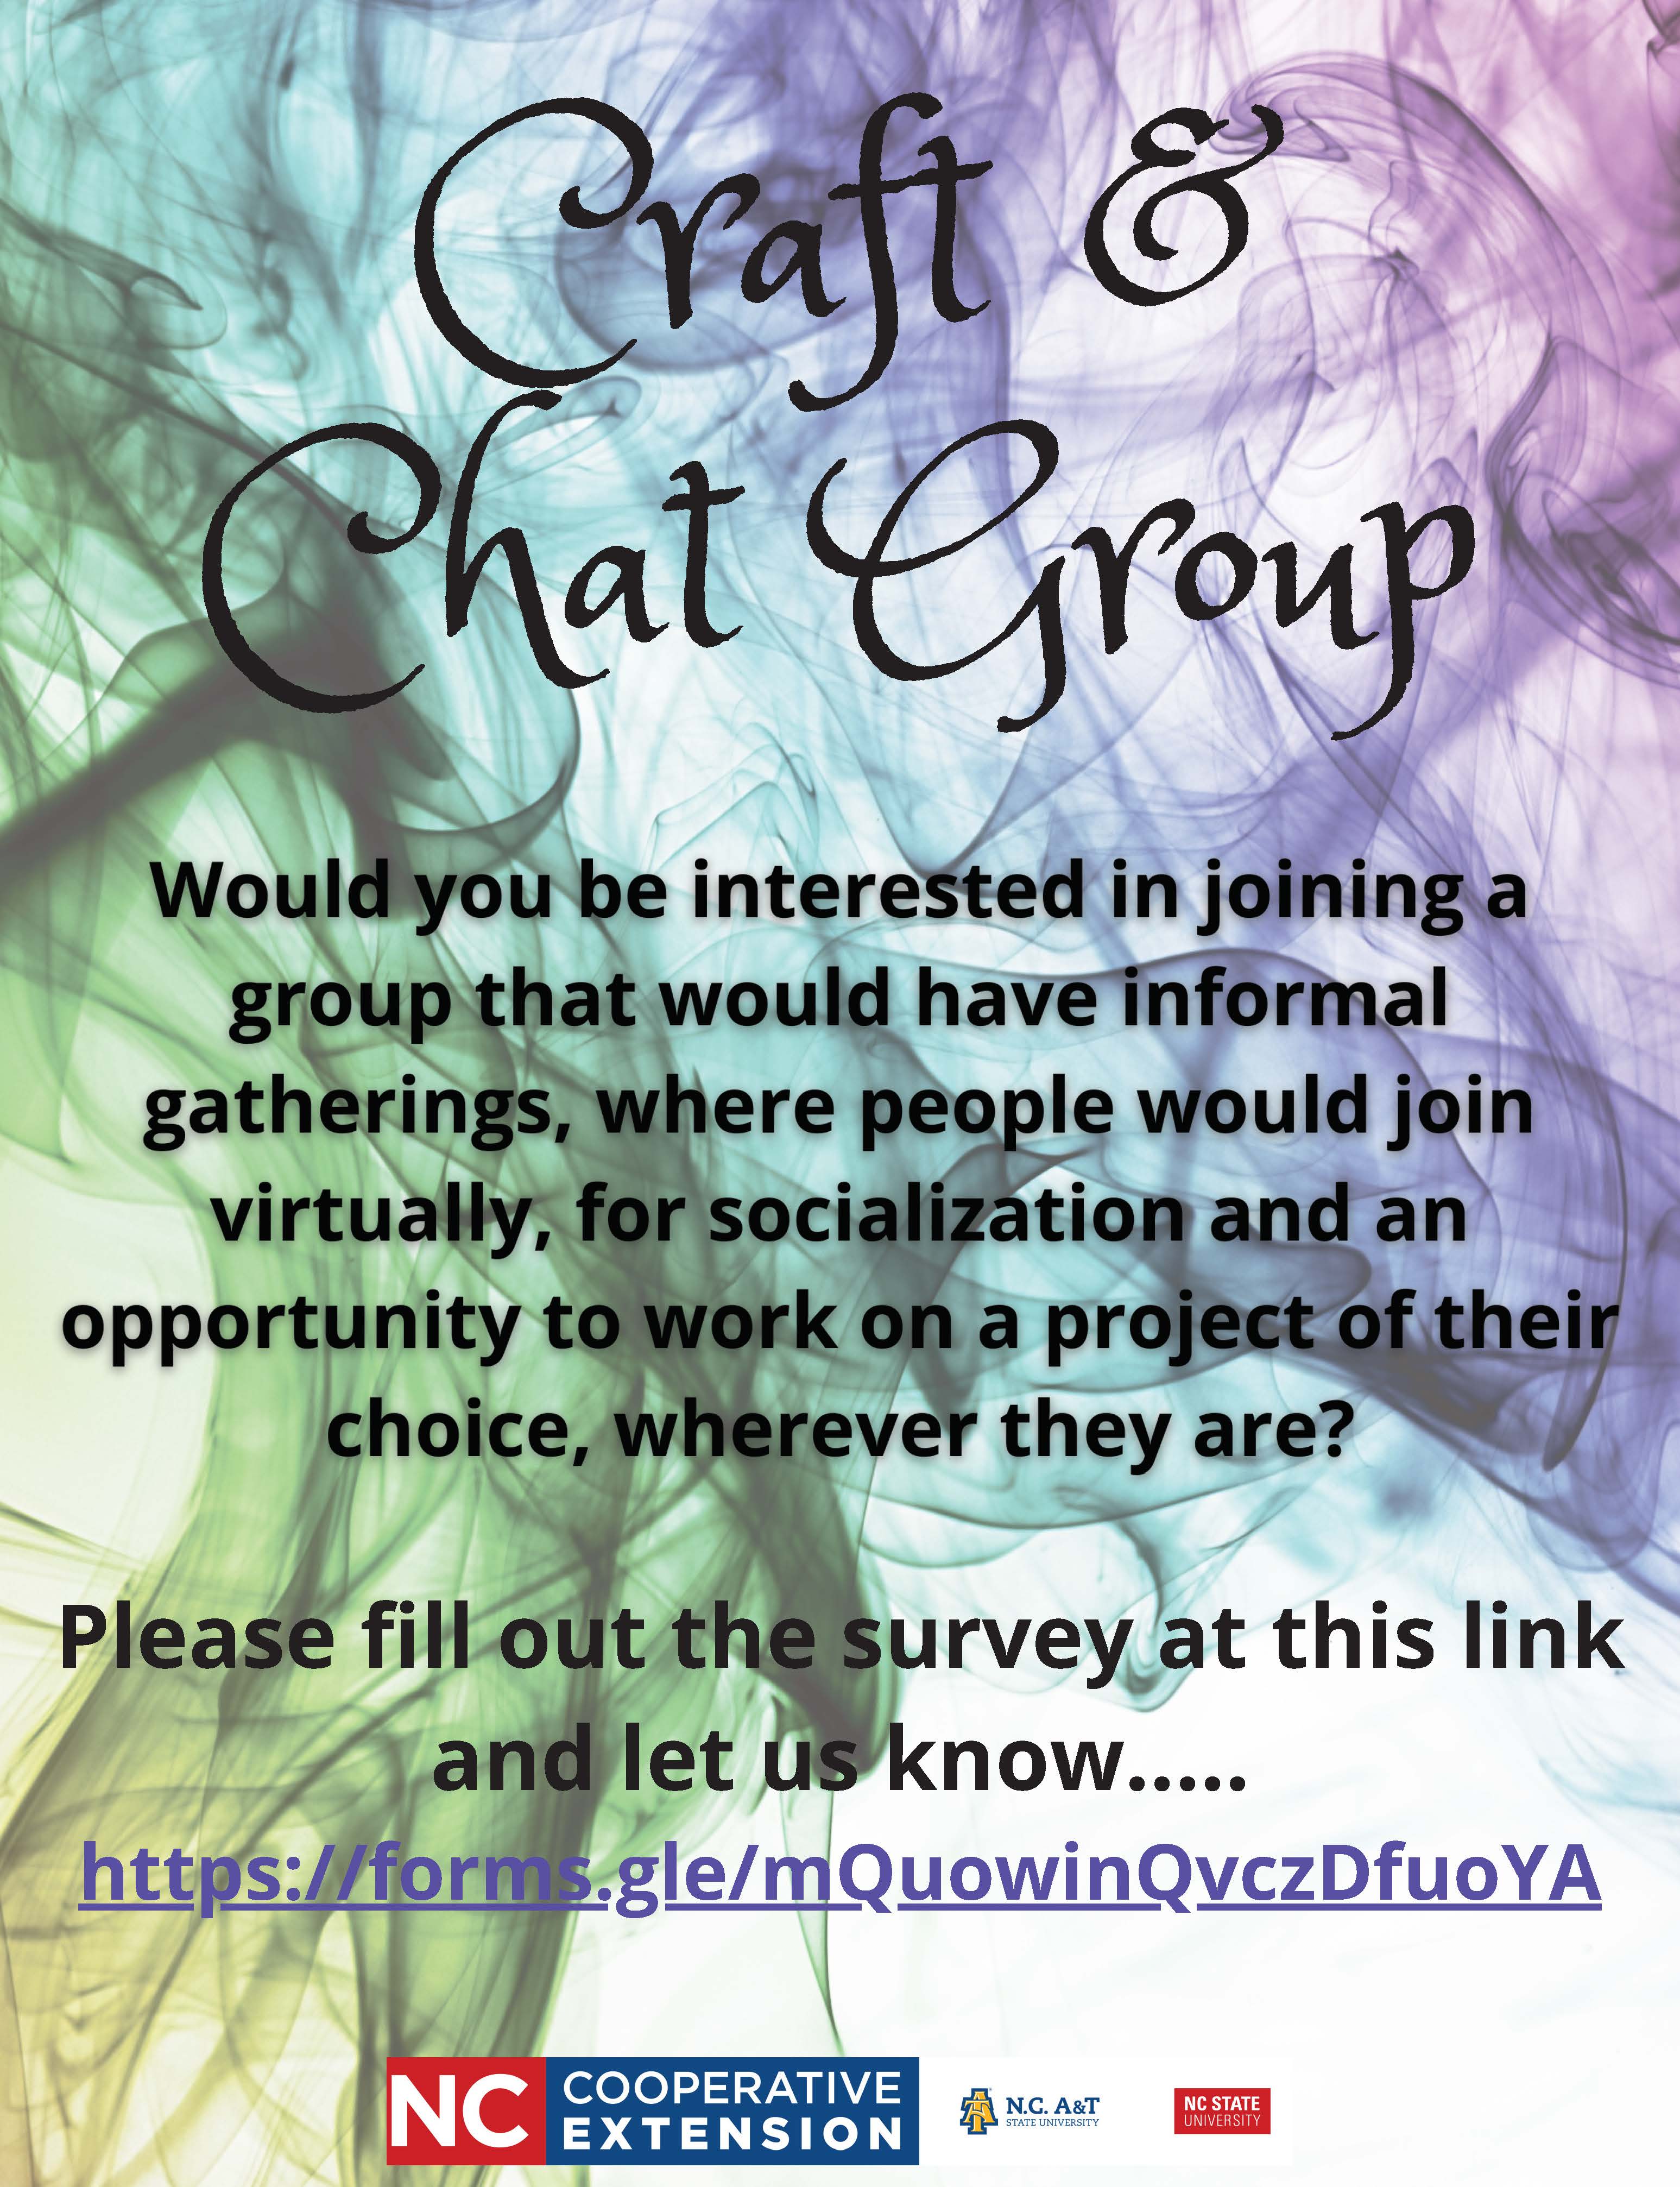 Craft and chat group survey